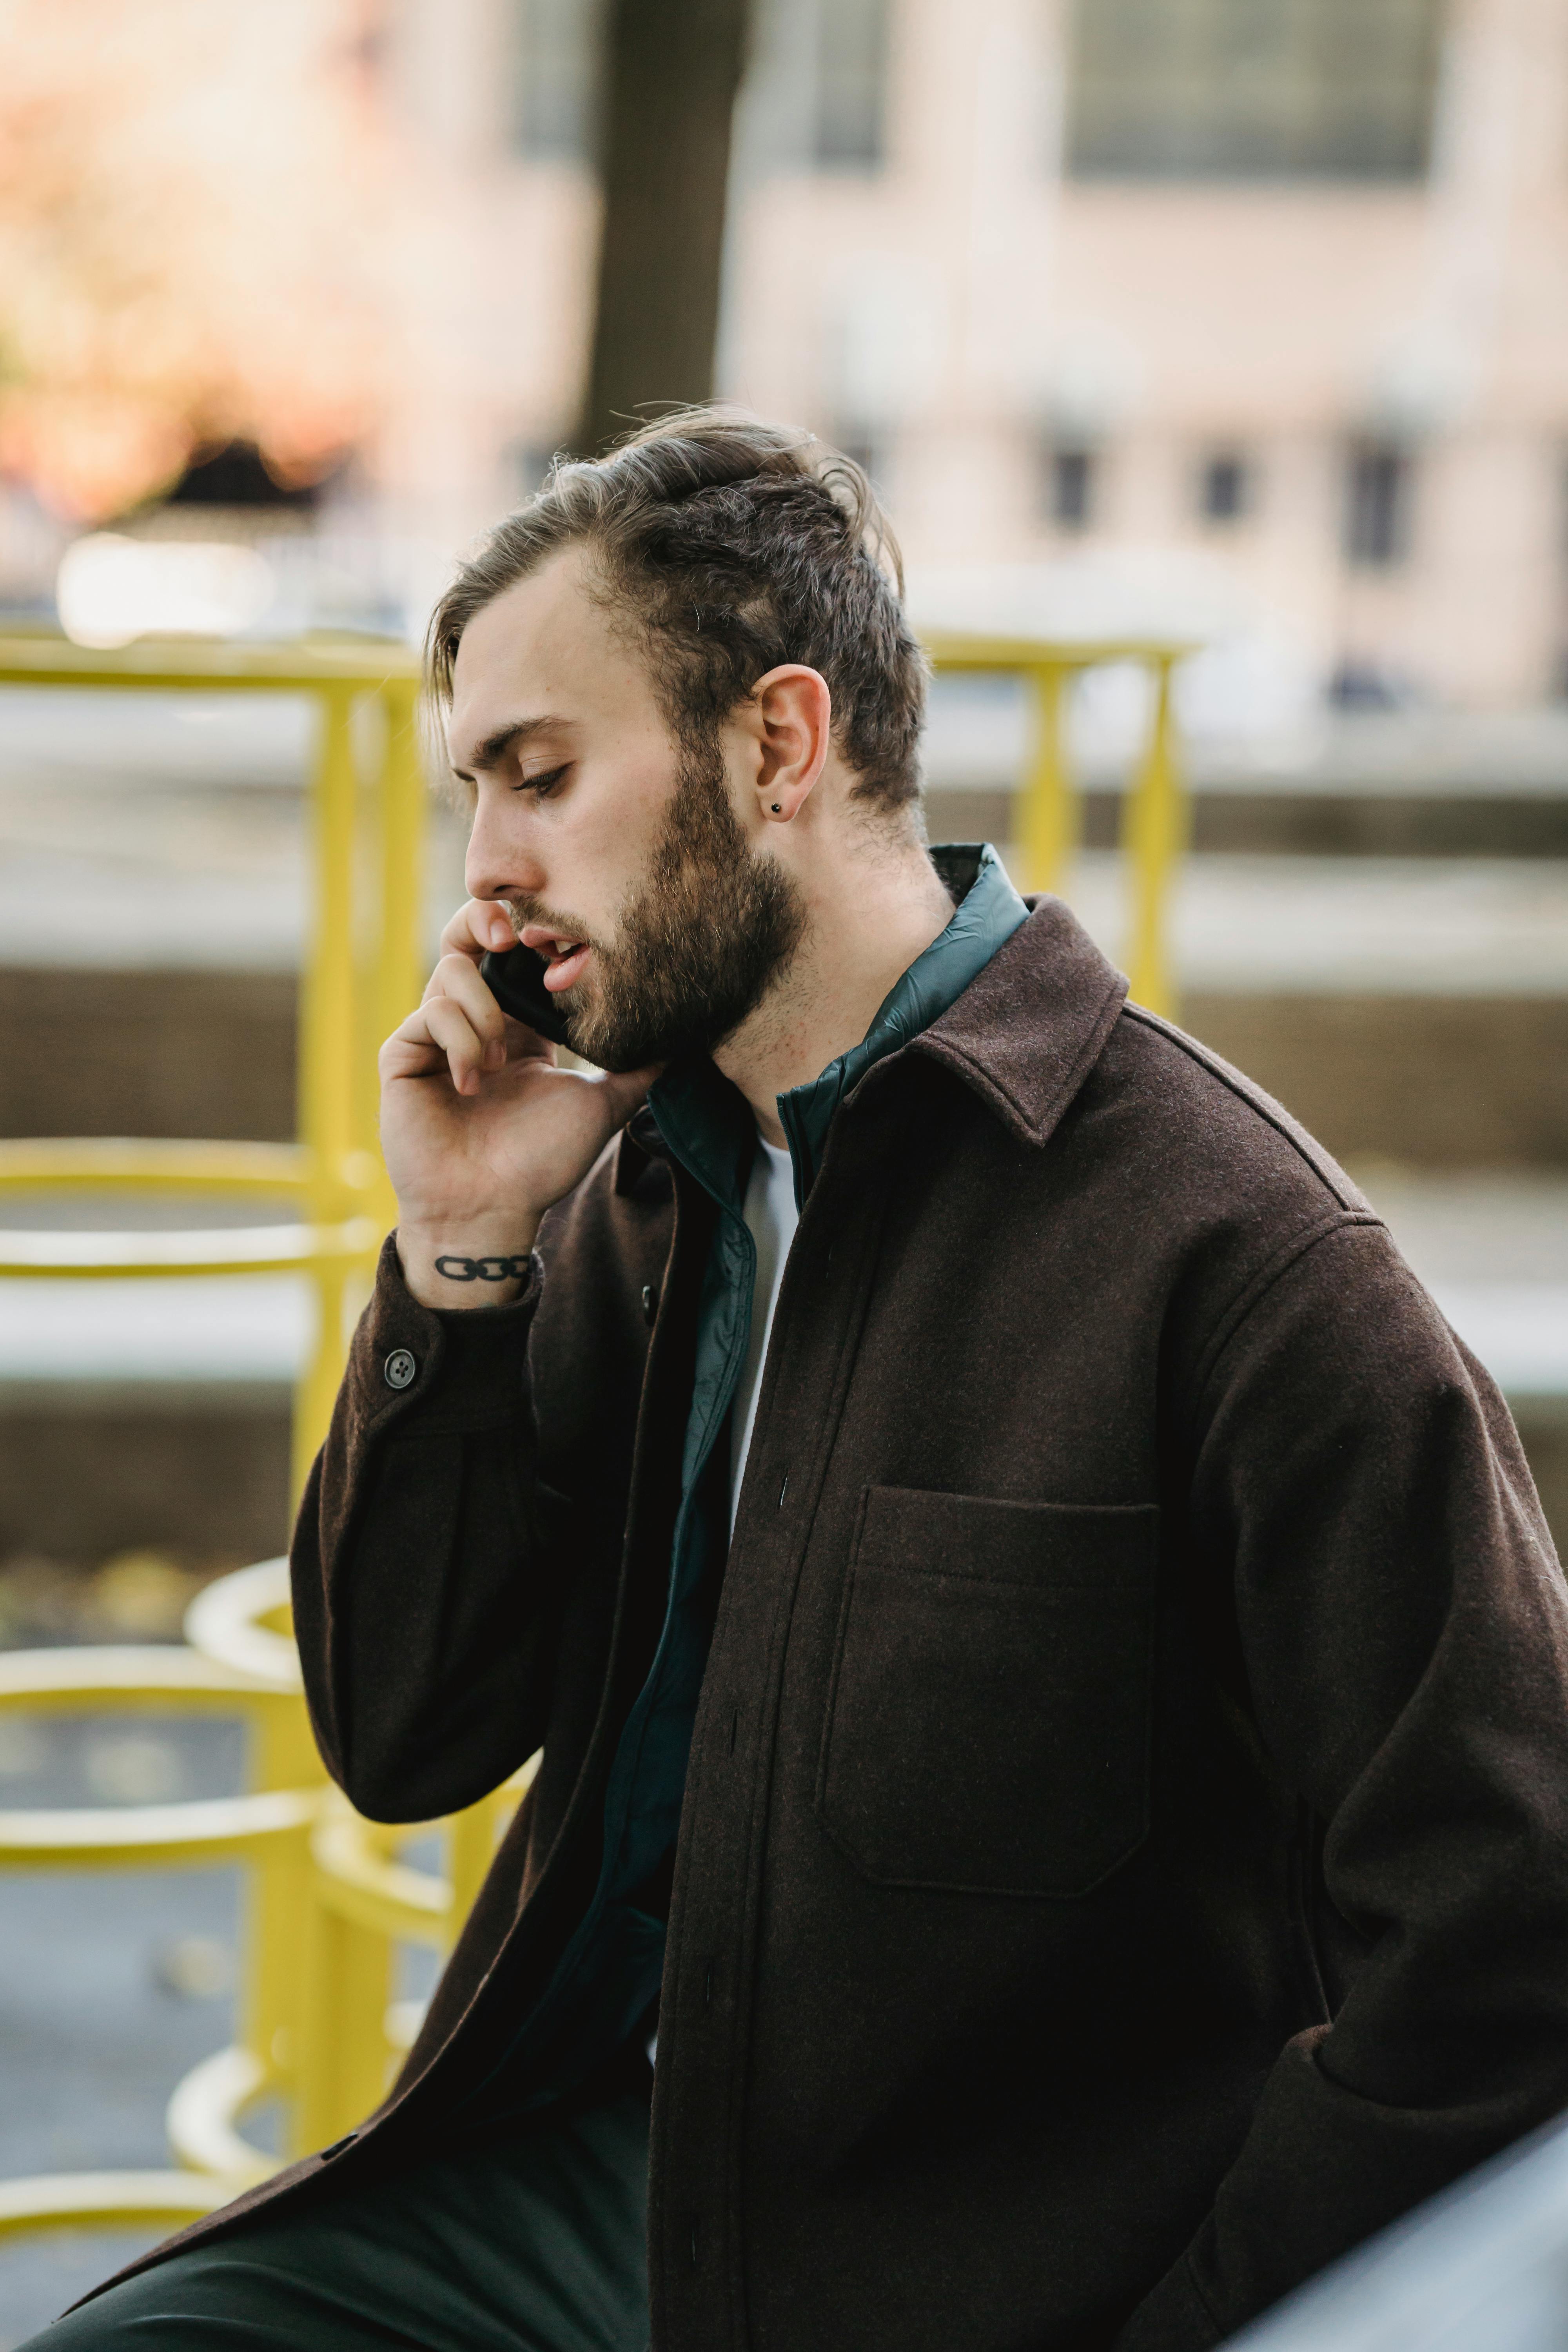 An unhappy-looking man talking on the phone | Source: Pexels